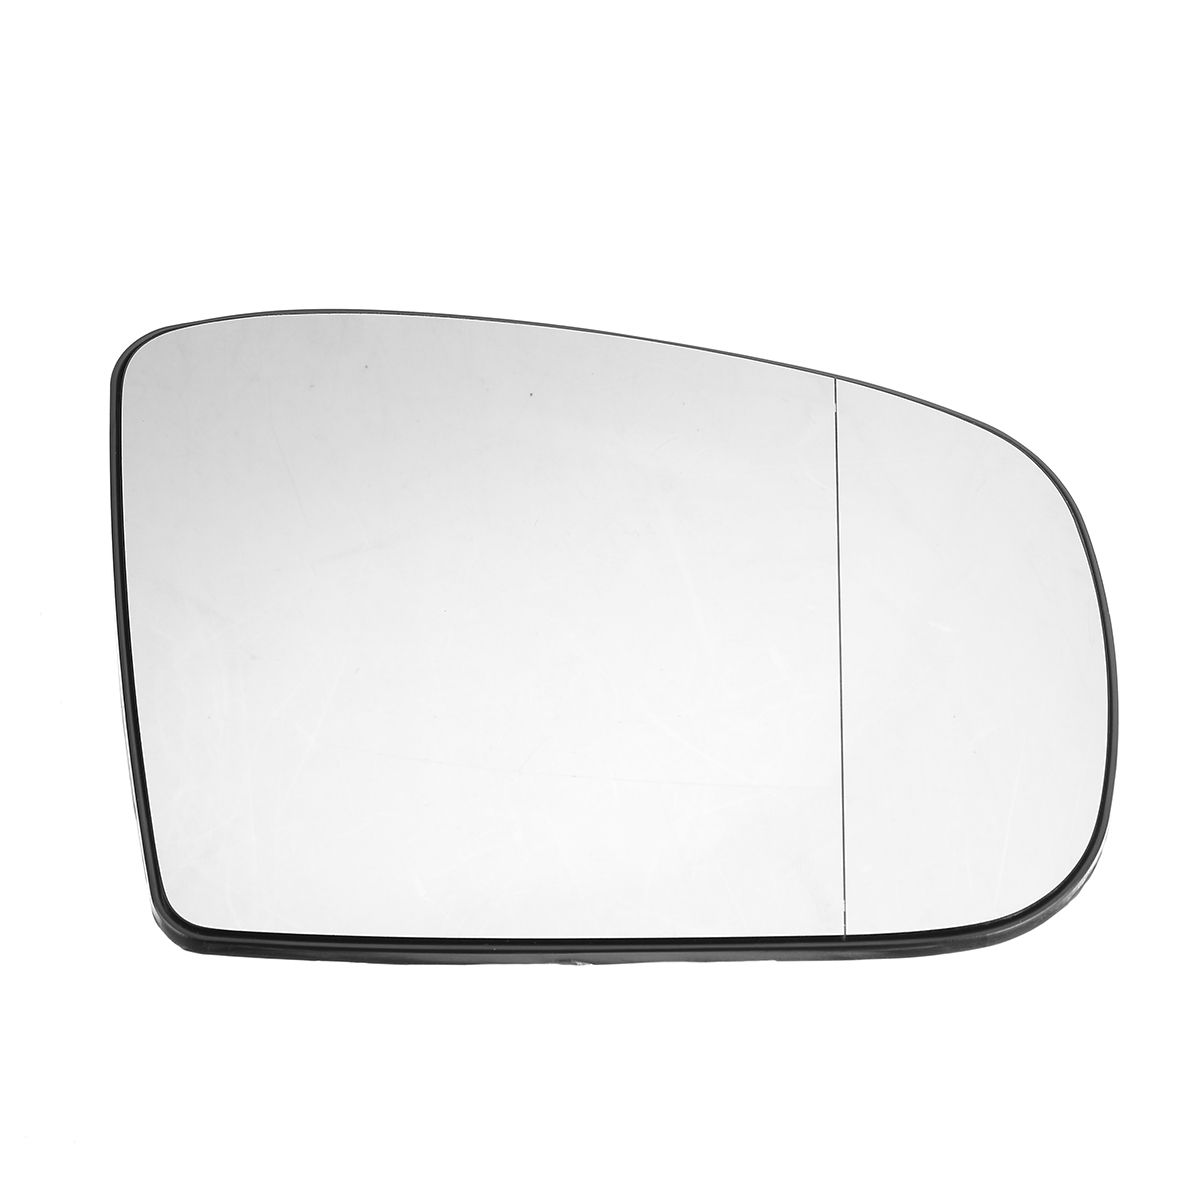 LeftRight-Antifog-Heated-Rearview-Mirror-Glass-For-Mercedes-M-Class-W163-2002-2005-1722447